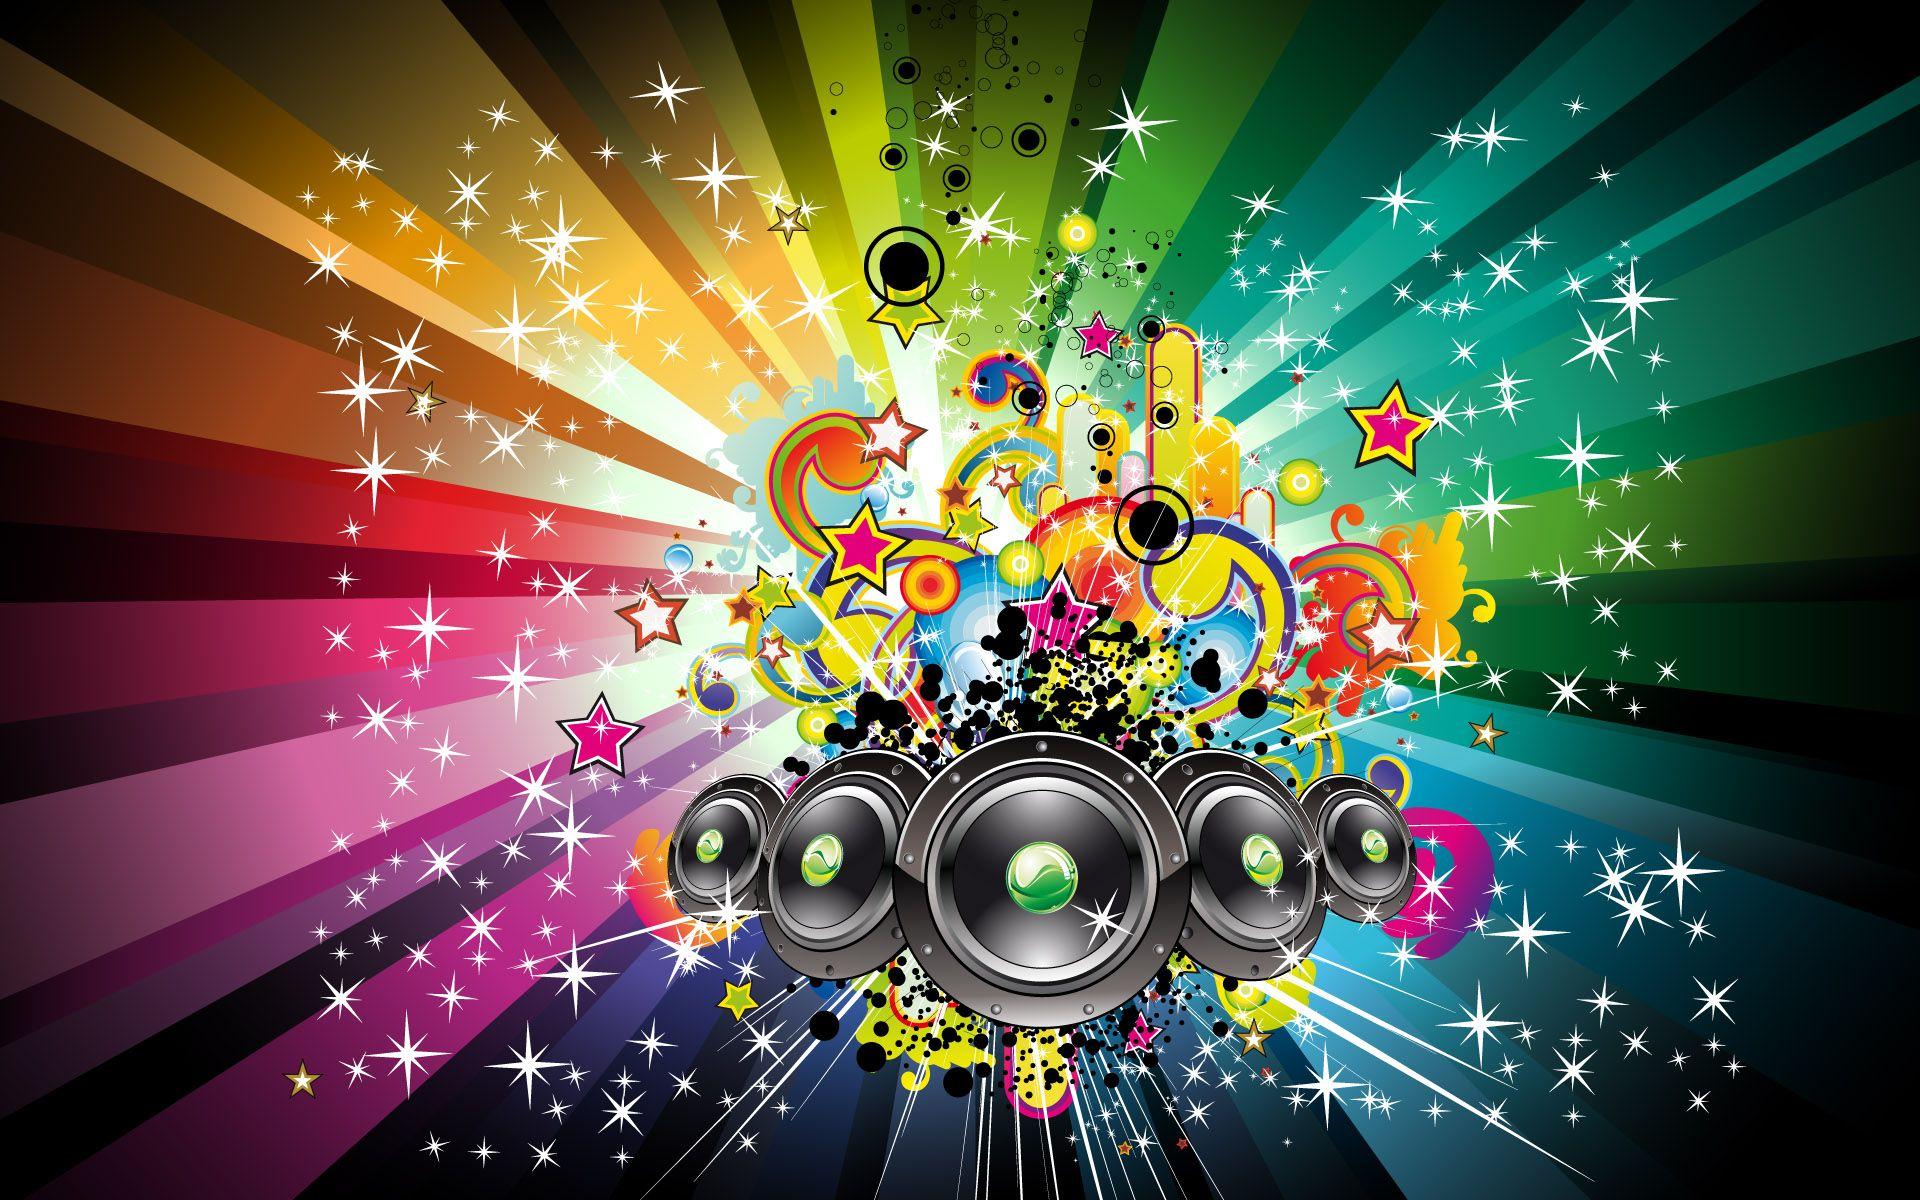 Google Image Result For Wp Content Uploads 2012 12 Music Wallpaper Picture Background. Music Wallpaper, Music Background, Dramatic Music